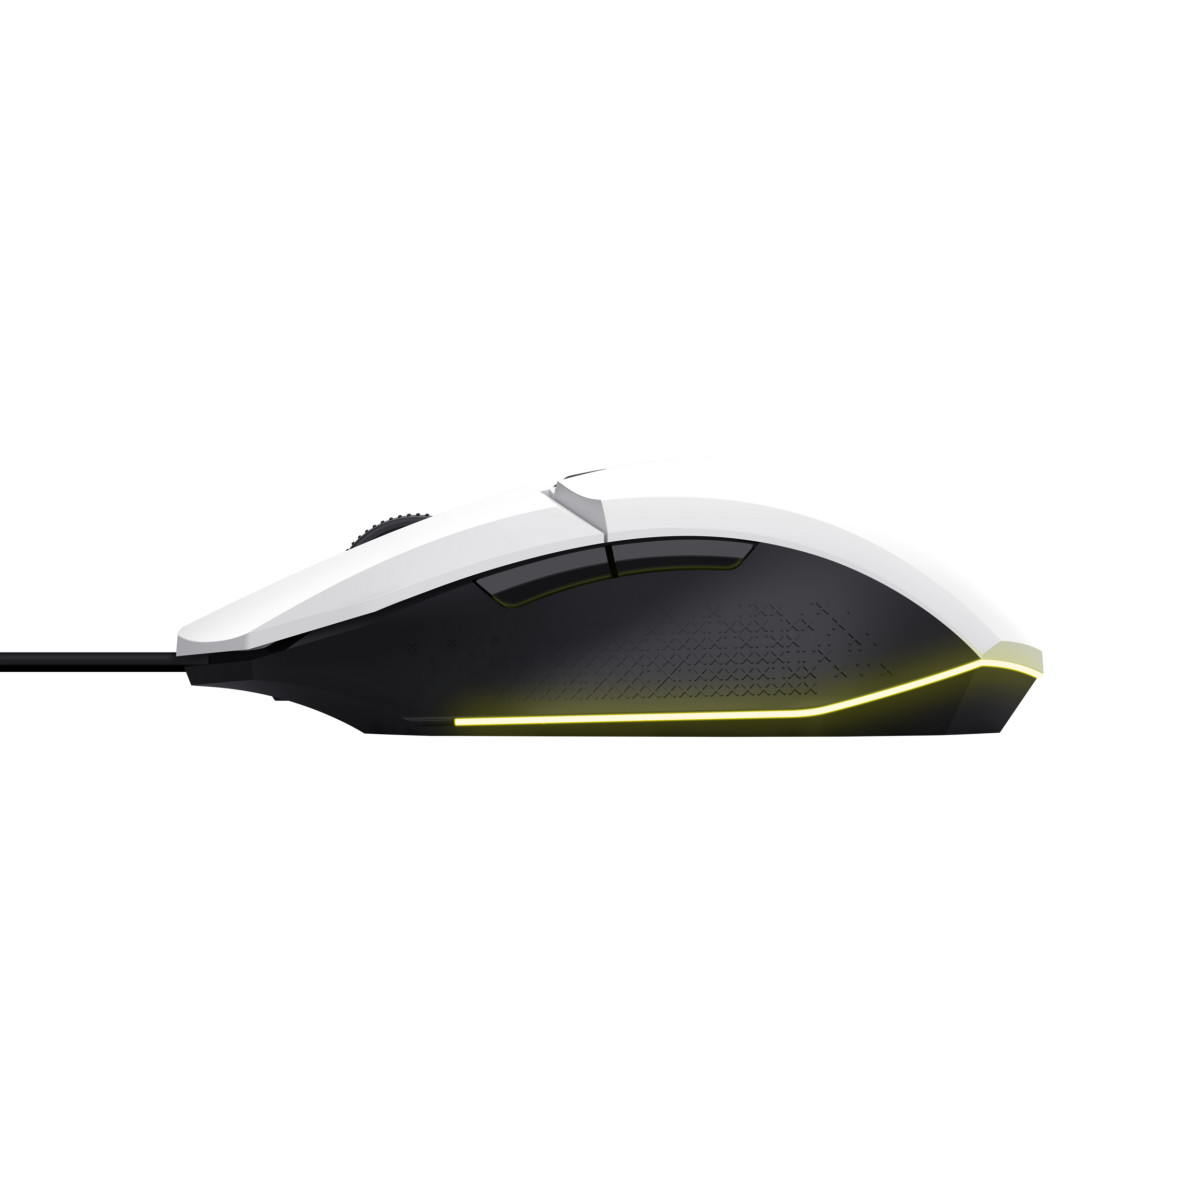 GXT109W Felox Gaming Mouse White